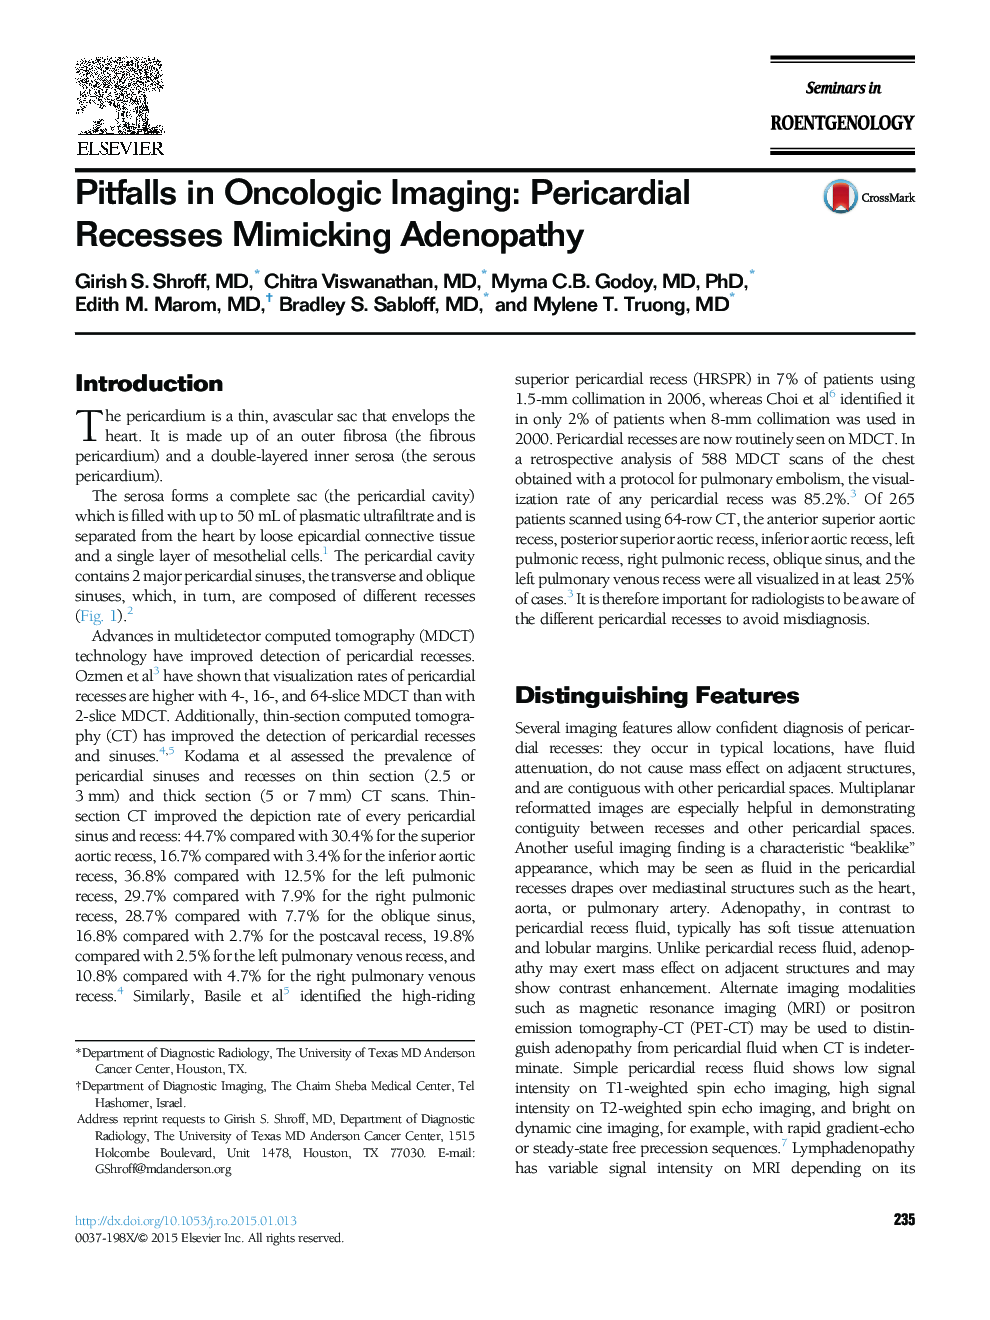 Pitfalls in Oncologic Imaging: Pericardial Recesses Mimicking Adenopathy